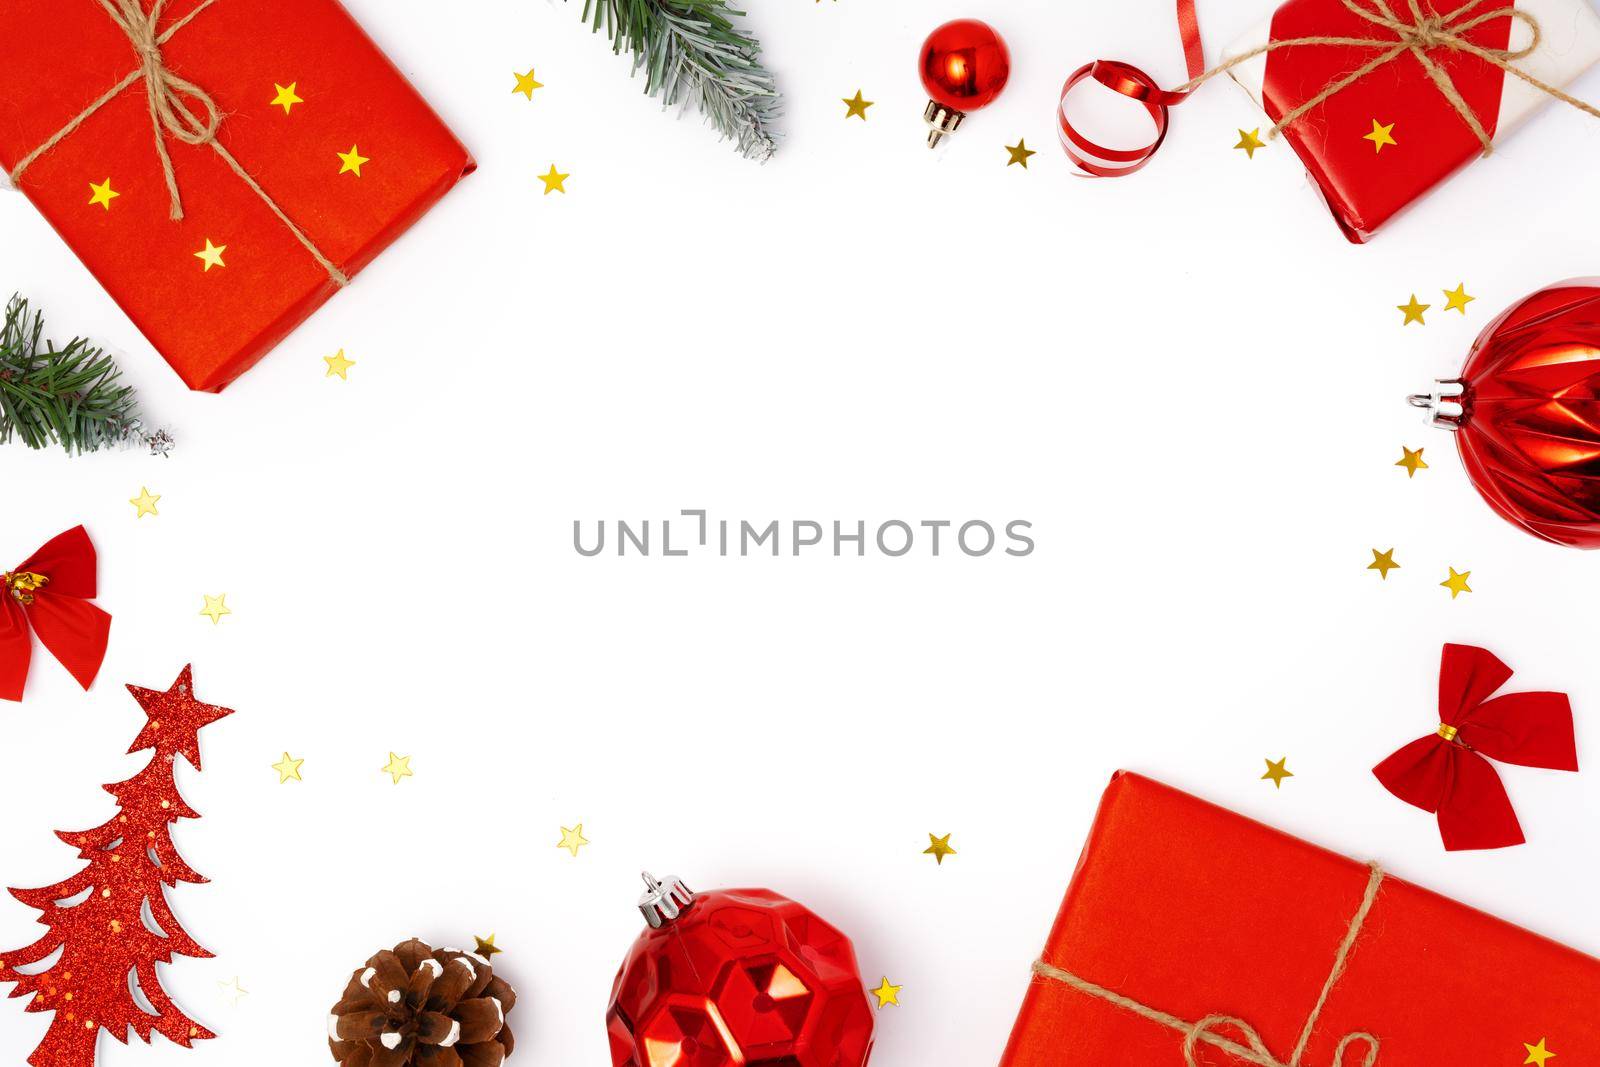 Top view Christmas decorations composition on white background with copy space by Fabrikasimf